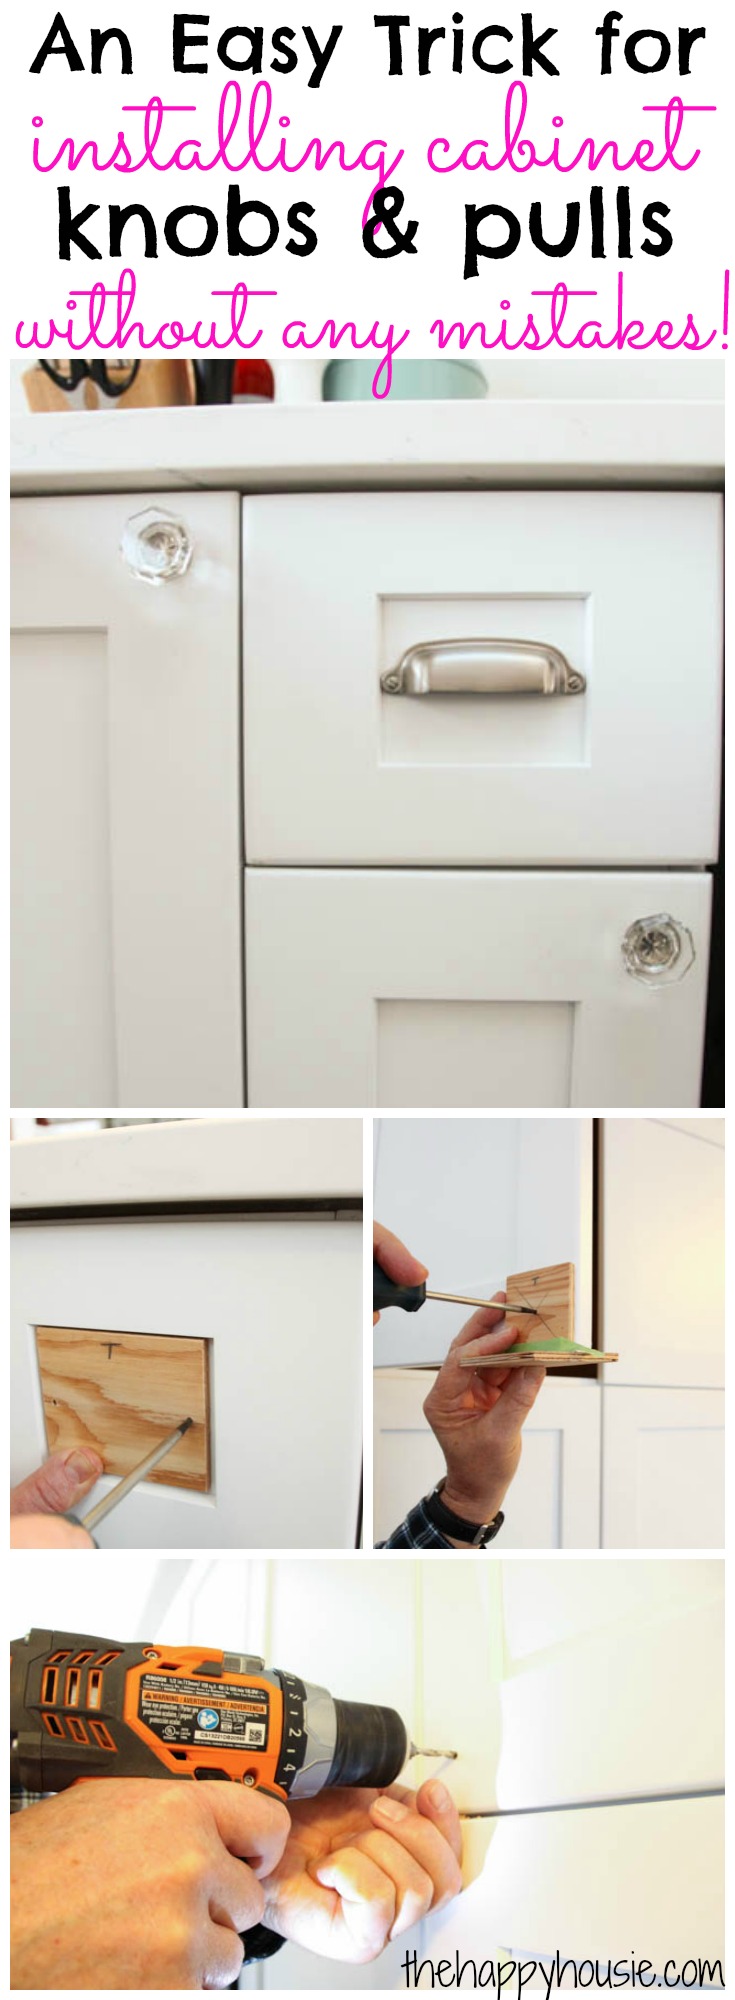 How To Install Cabinet Knobs With A Template A Trick For Avoiding